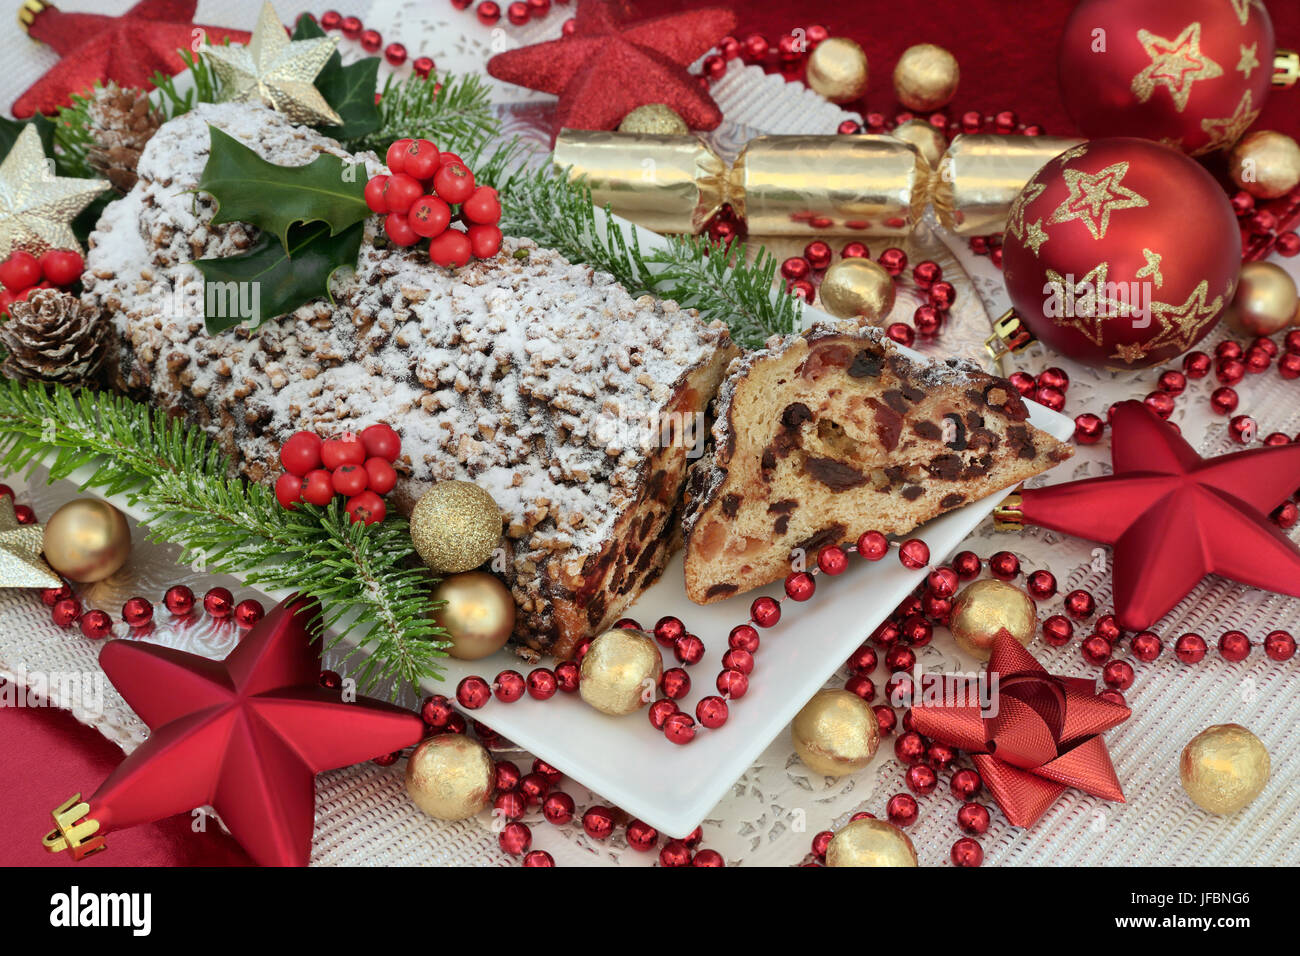 Traditional christmas chocolate stollen cake on a plate with slice, red and gold bauble decorations, foil wrapped chocolates, holy and fir. Stock Photo